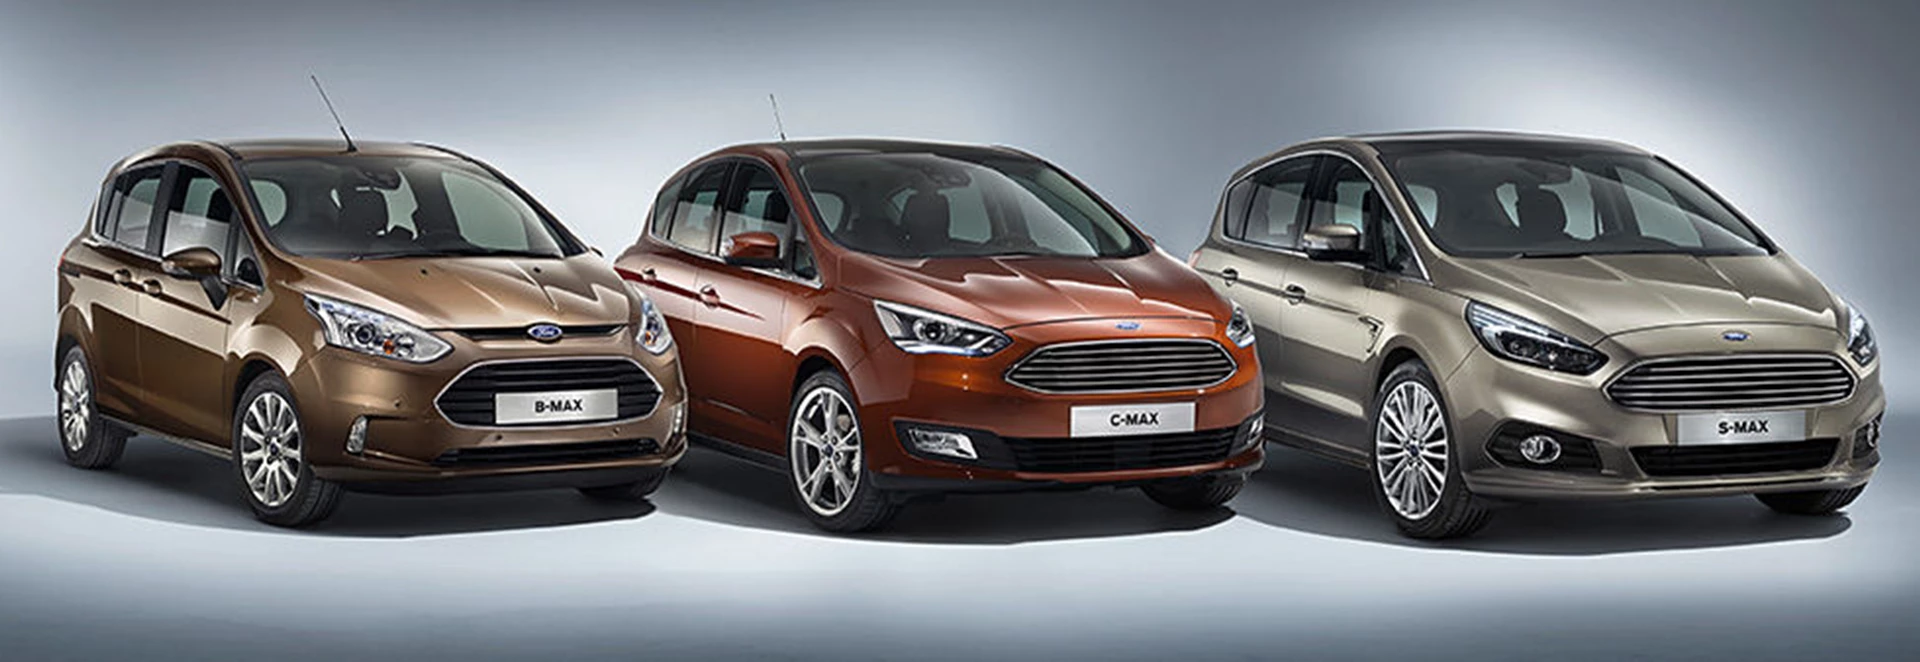 2015 Ford C-MAX and S-MAX prices announced 